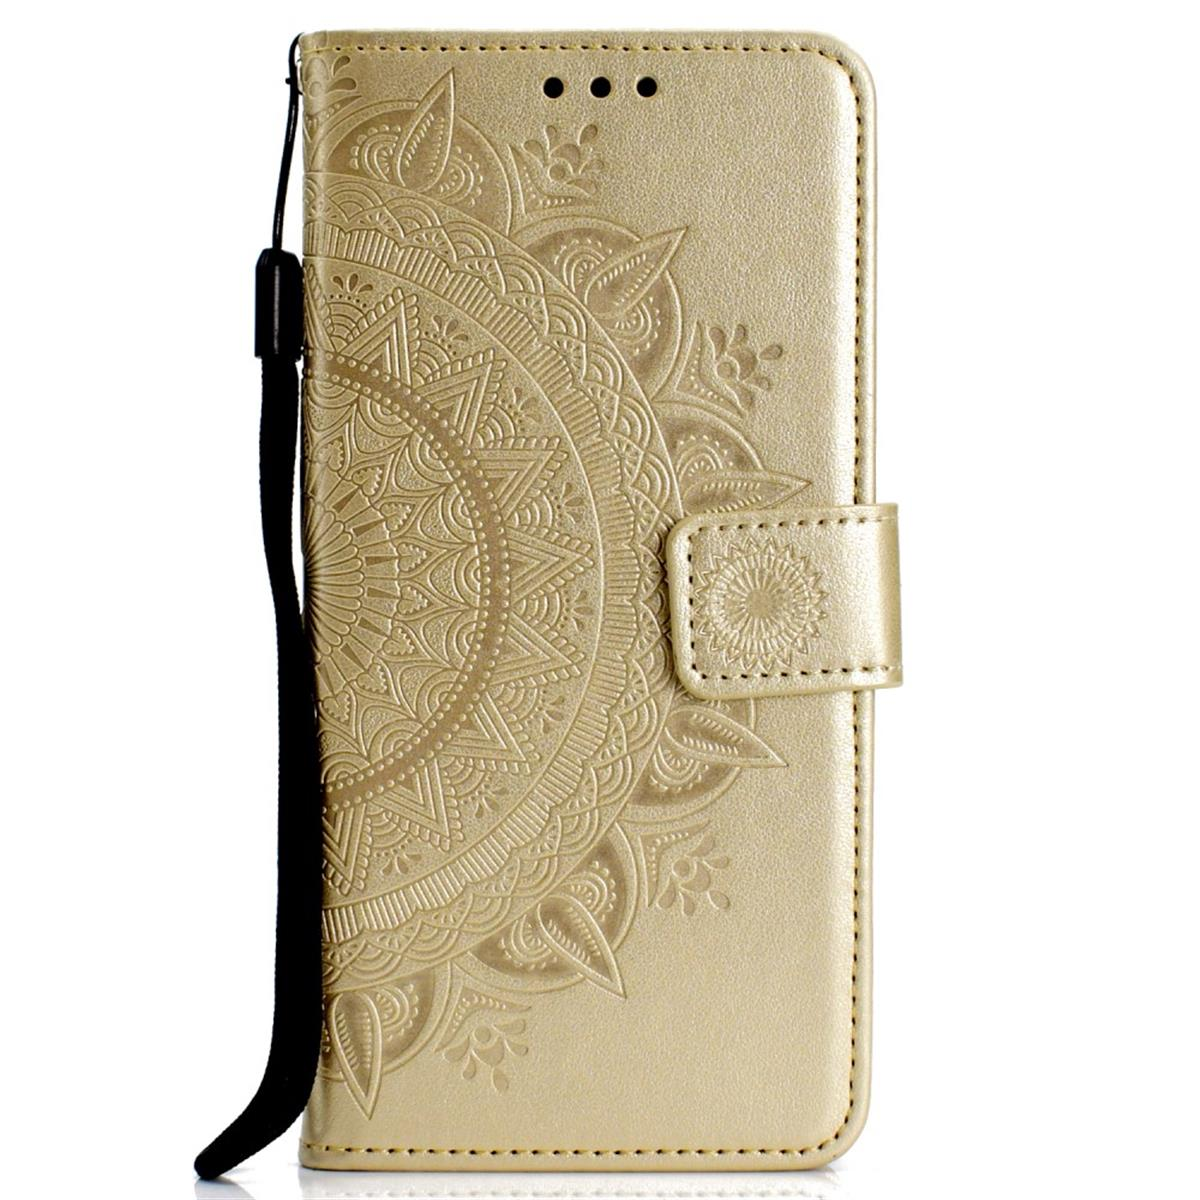 COVERKINGZ Klapphülle Gold P30, mit Bookcover, Mandala Muster, Huawei,